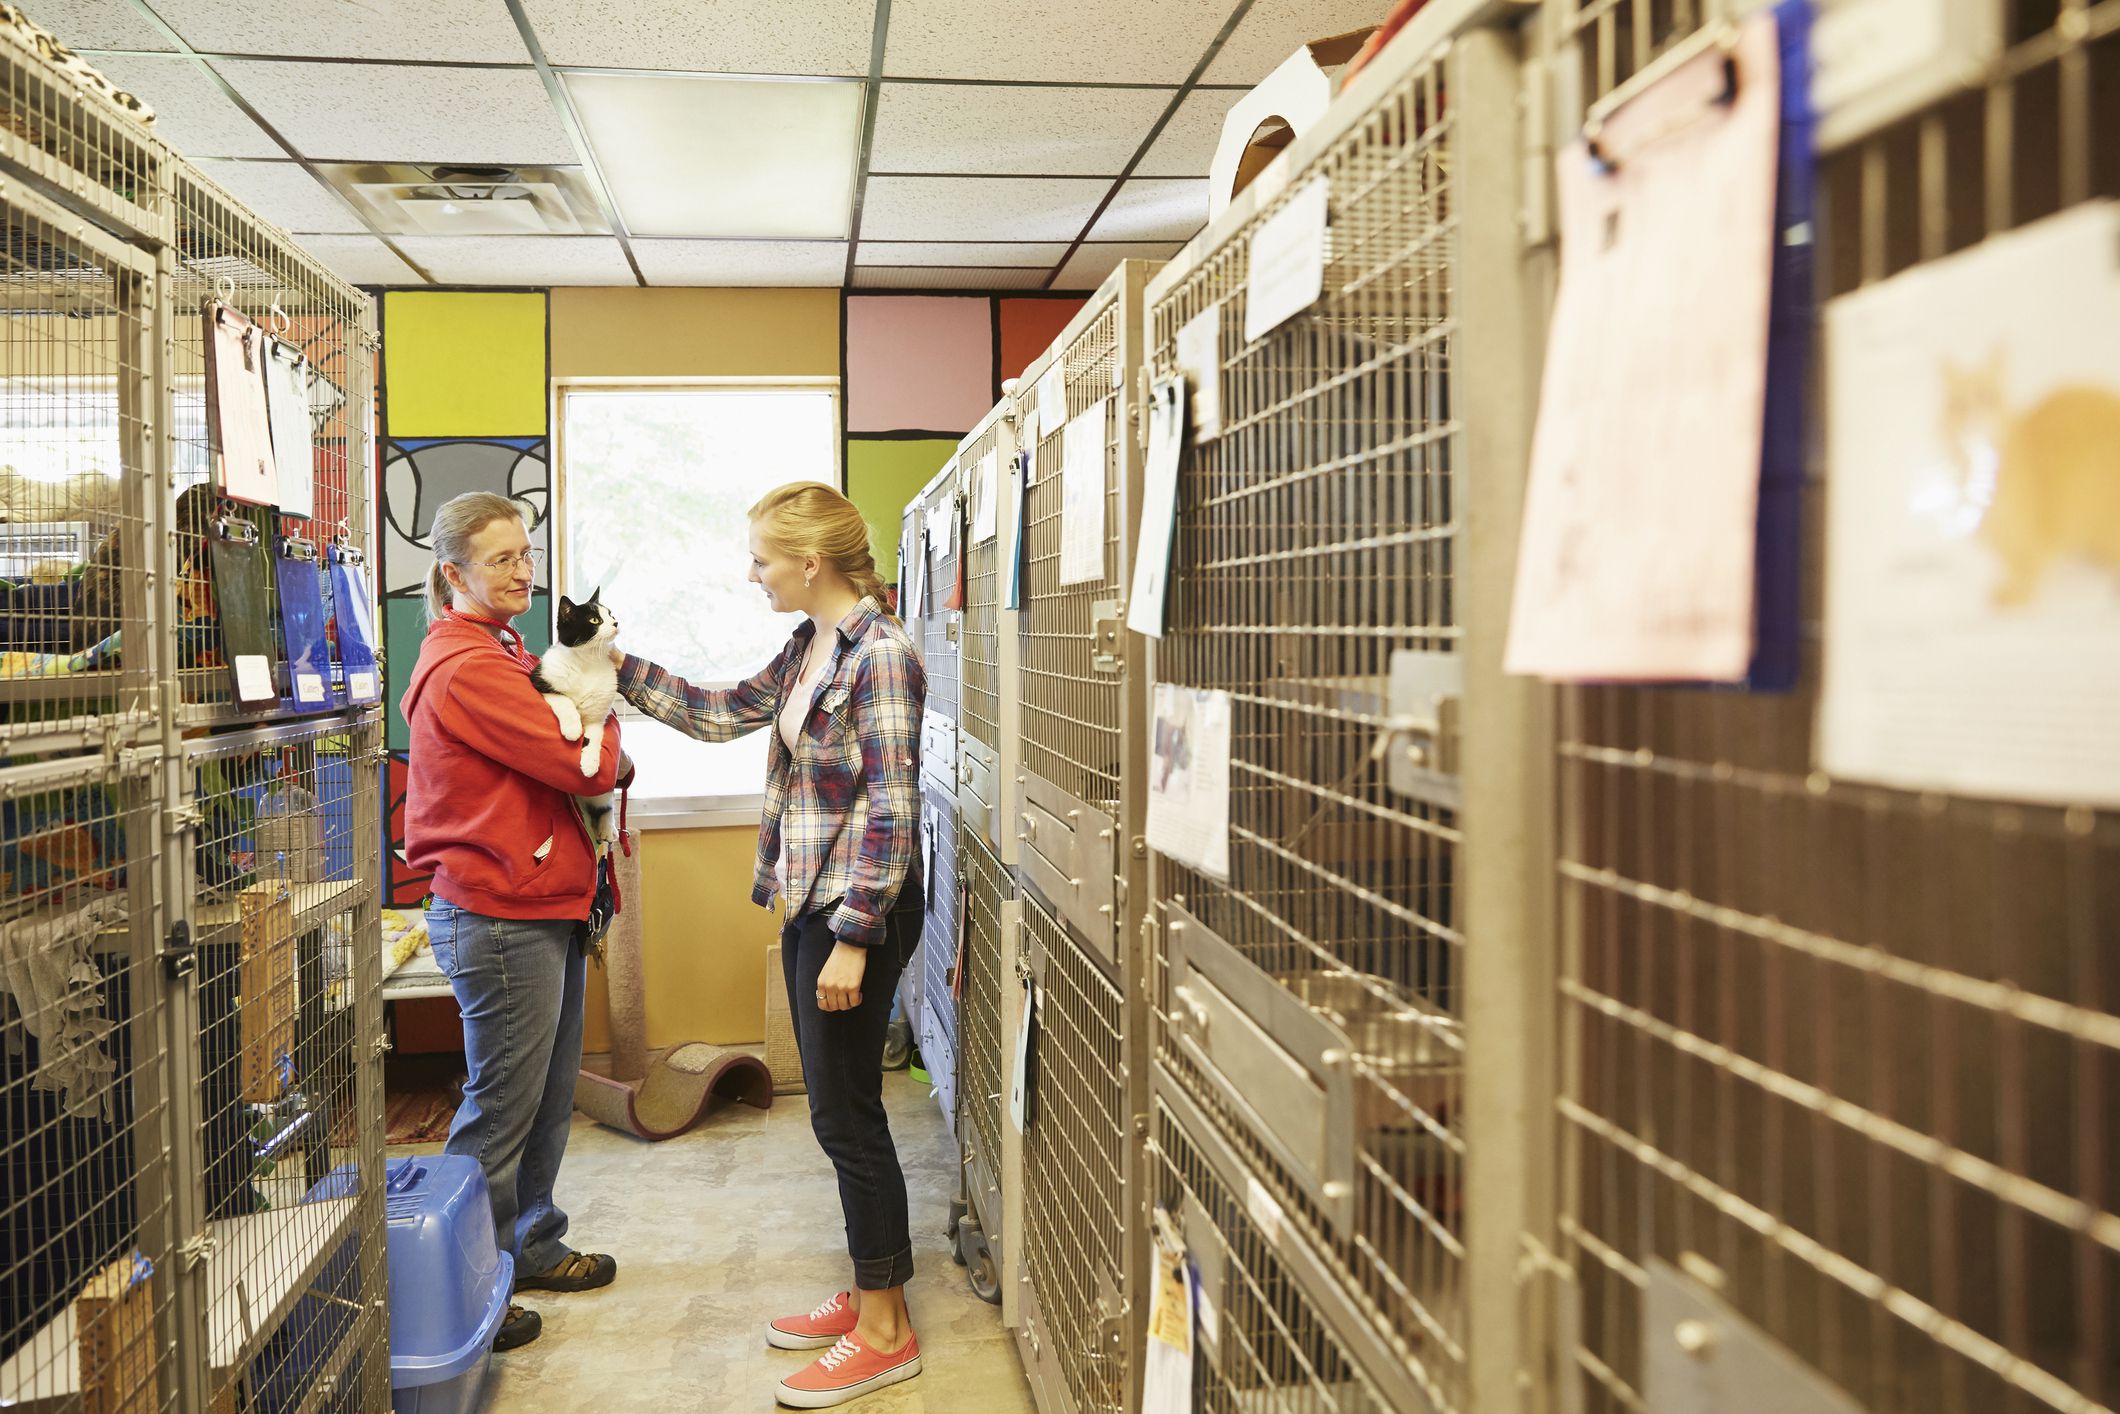 Career Profile of an Animal Shelter Manager